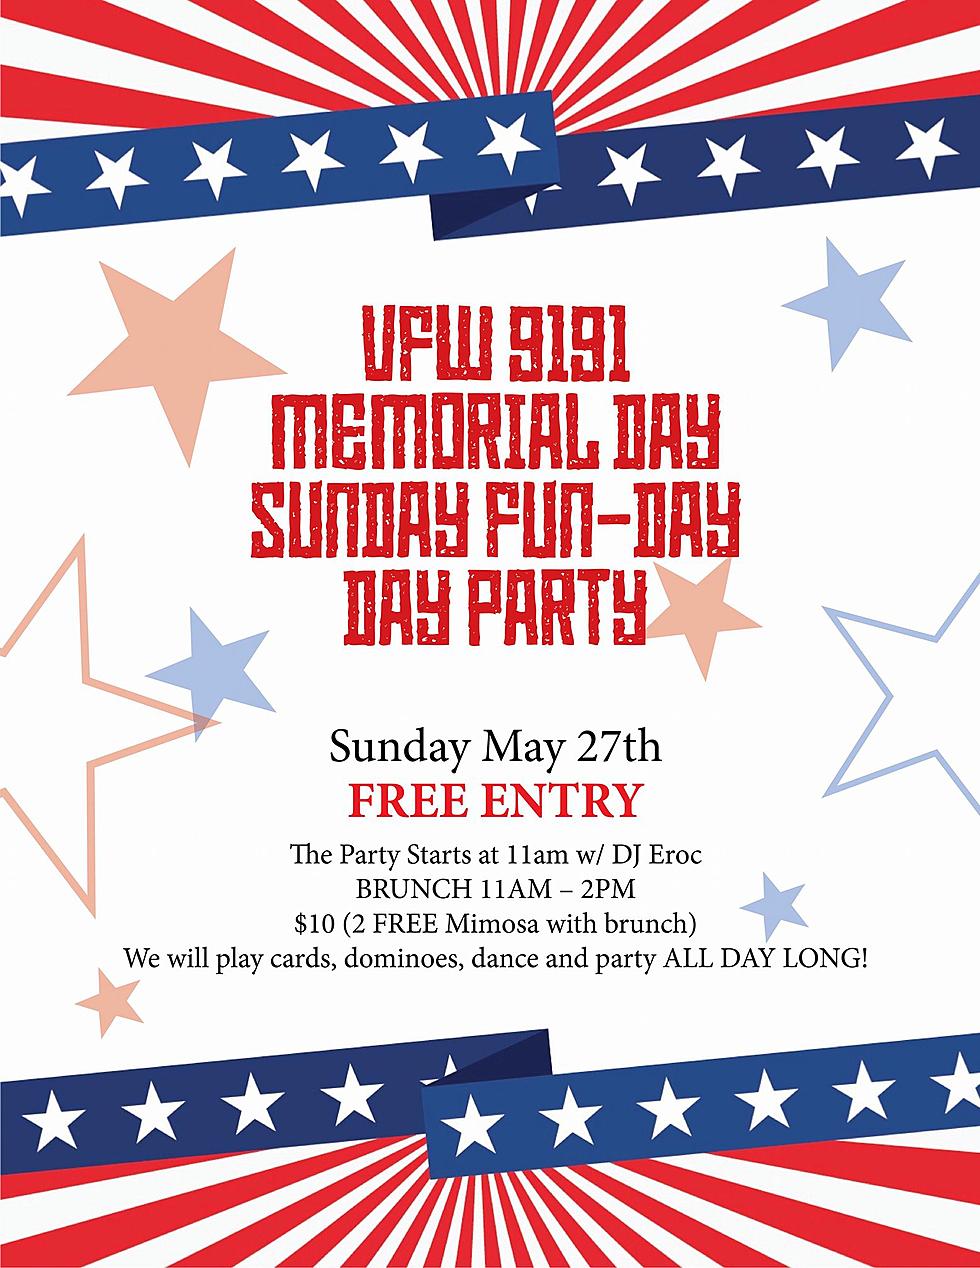 VFW Post 9191 Memorial Day Sunday Fun-Day Party